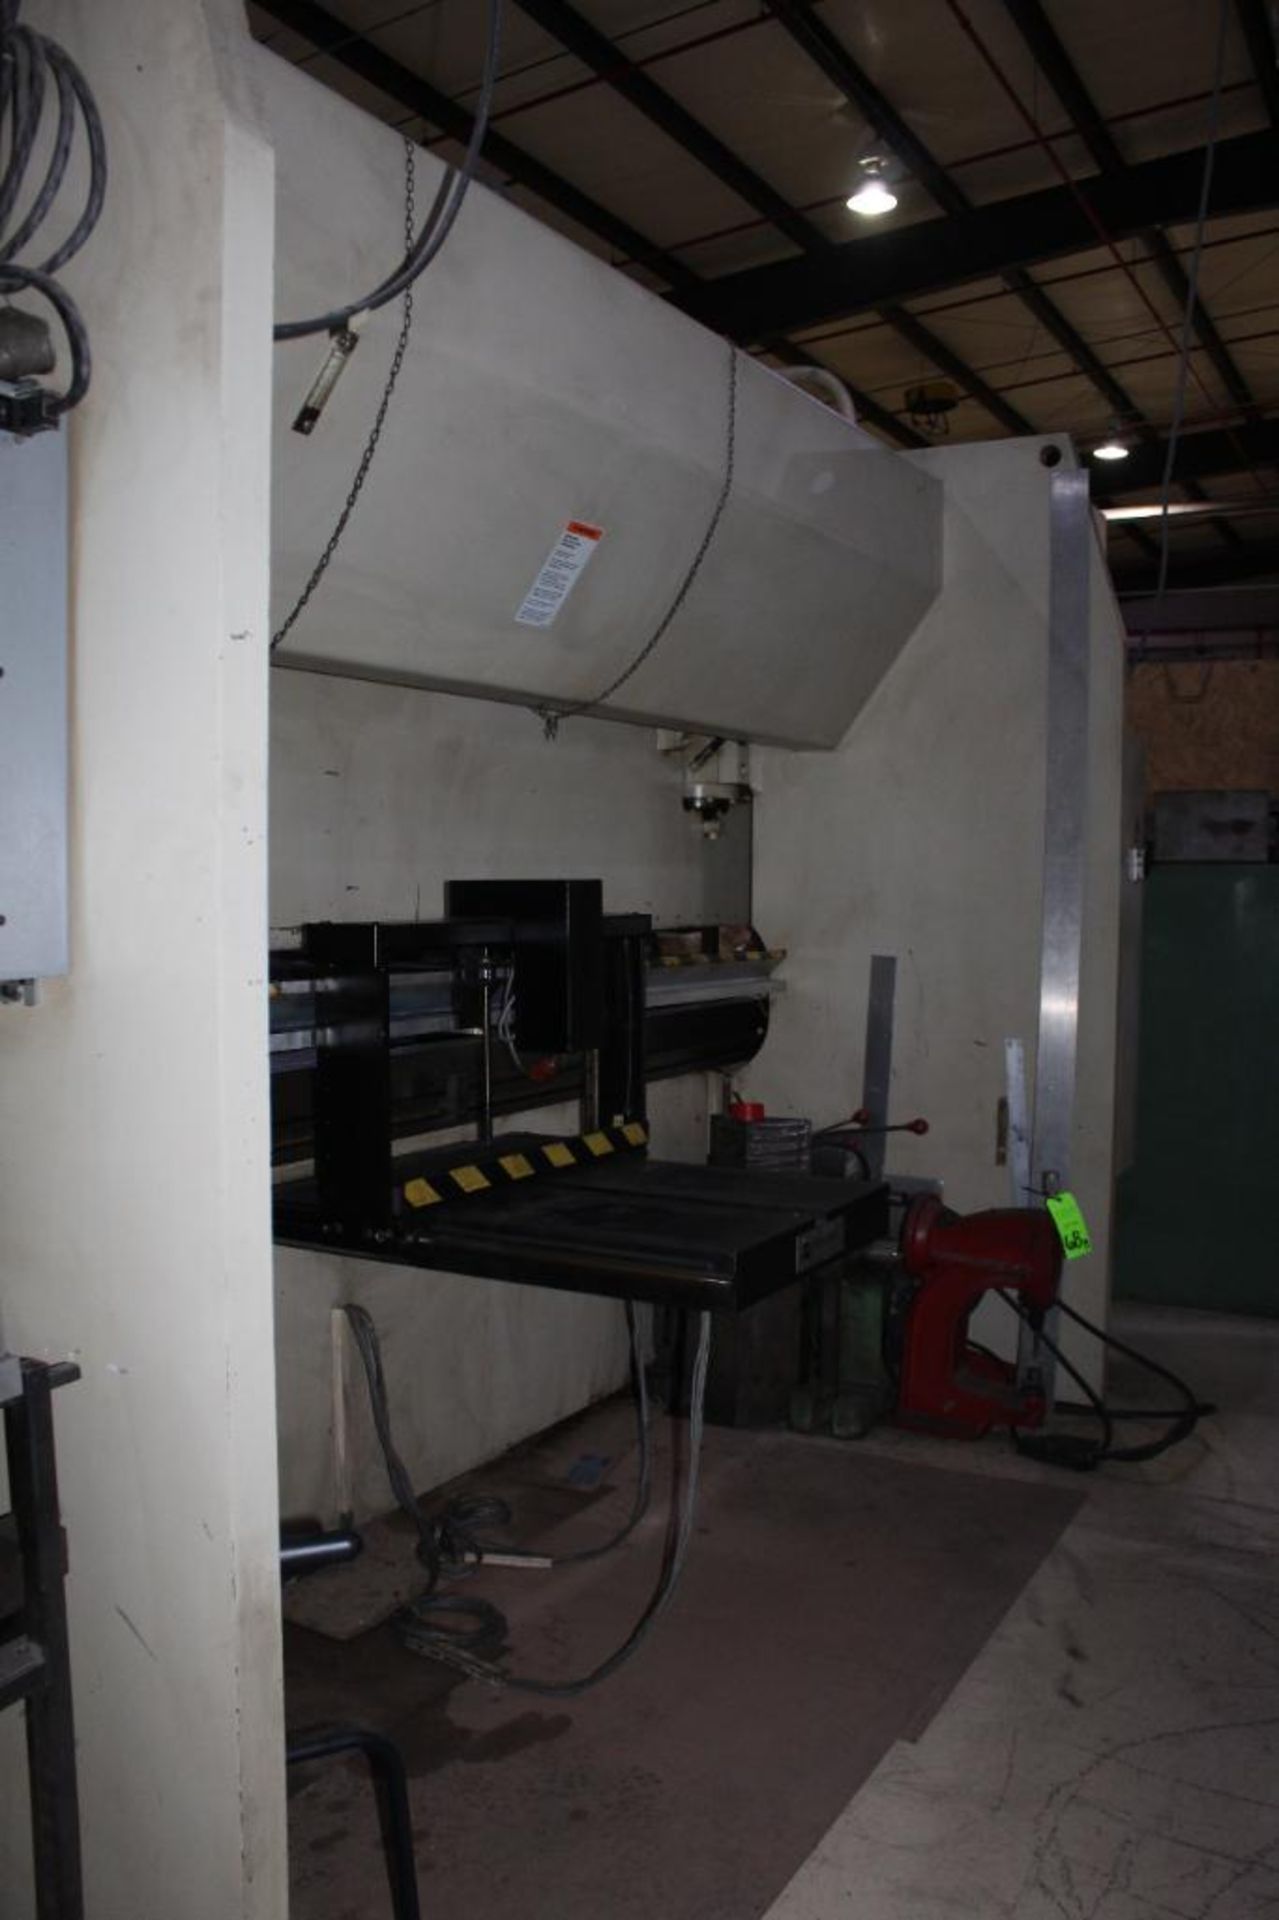 1995 LVD Hydraulic Press Brake Model 180JS13 Equipped With Hurco AutoBend 7 CNC Back Gage - Image 7 of 22